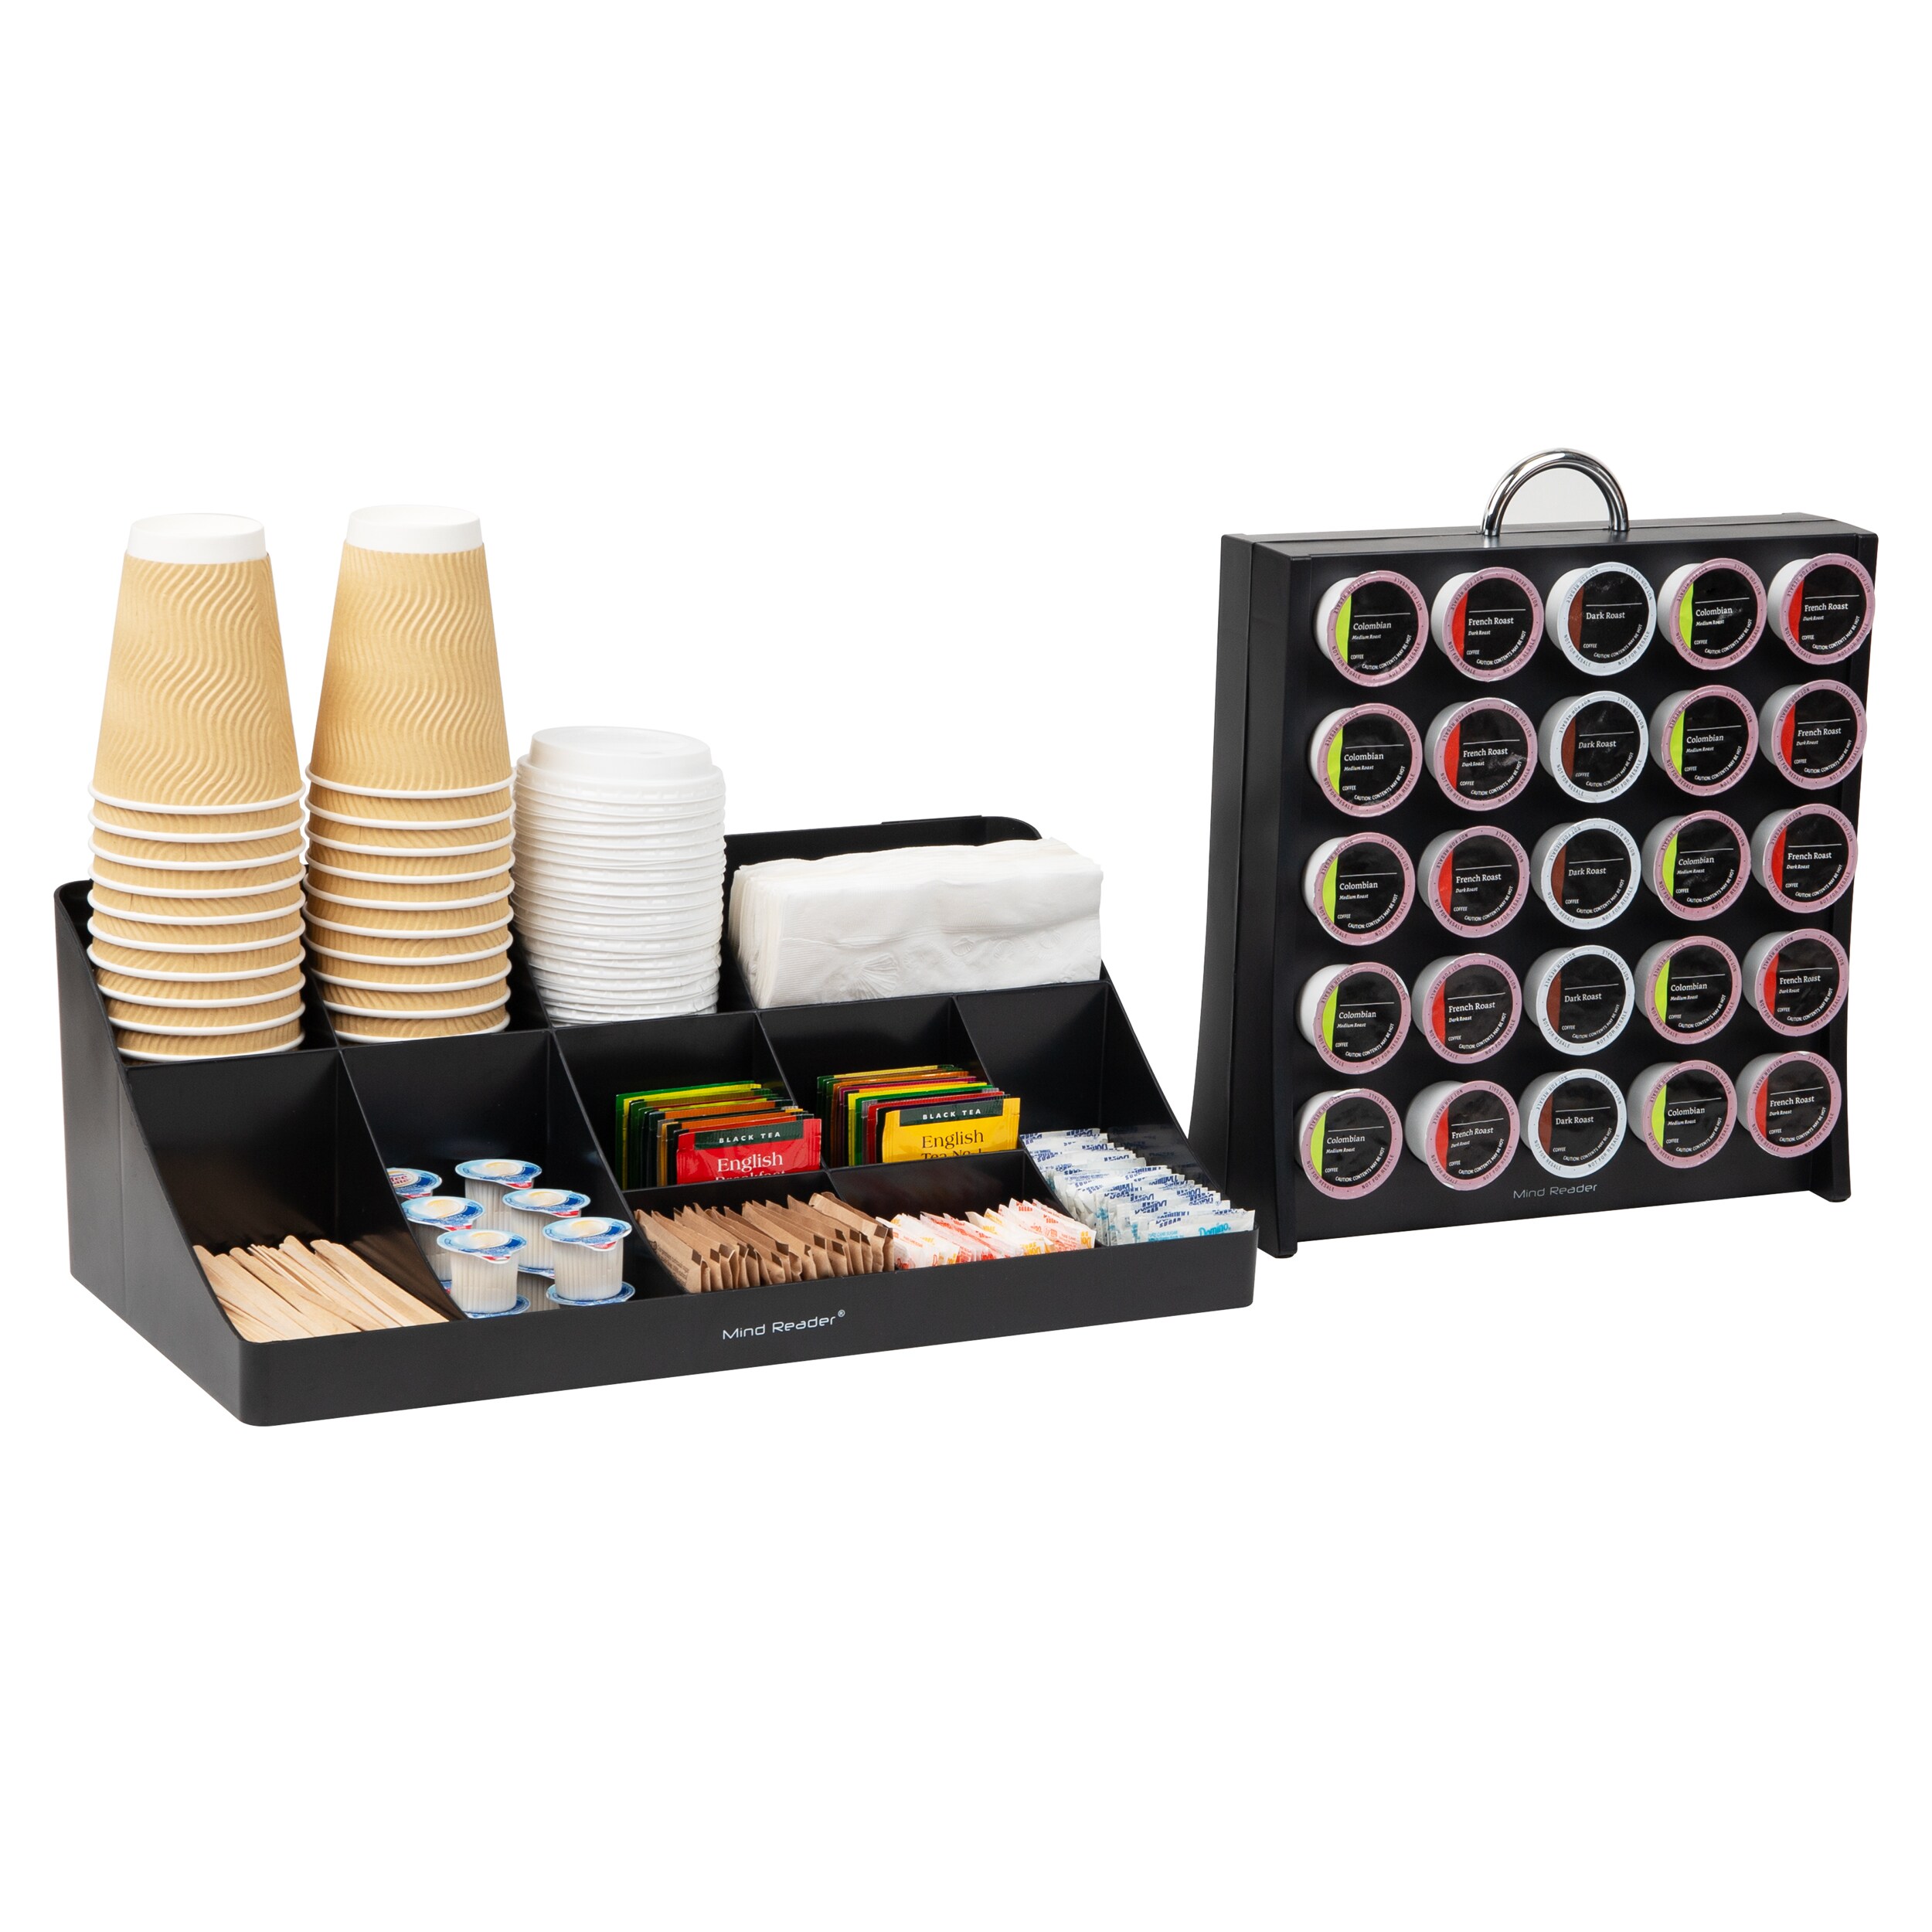 Coffee Station Organizer Wooden Coffee Bar Accessories and Organizer for  Countertop, Coffee Pods Holder Storage Basket, Coffee and Tea Condiment